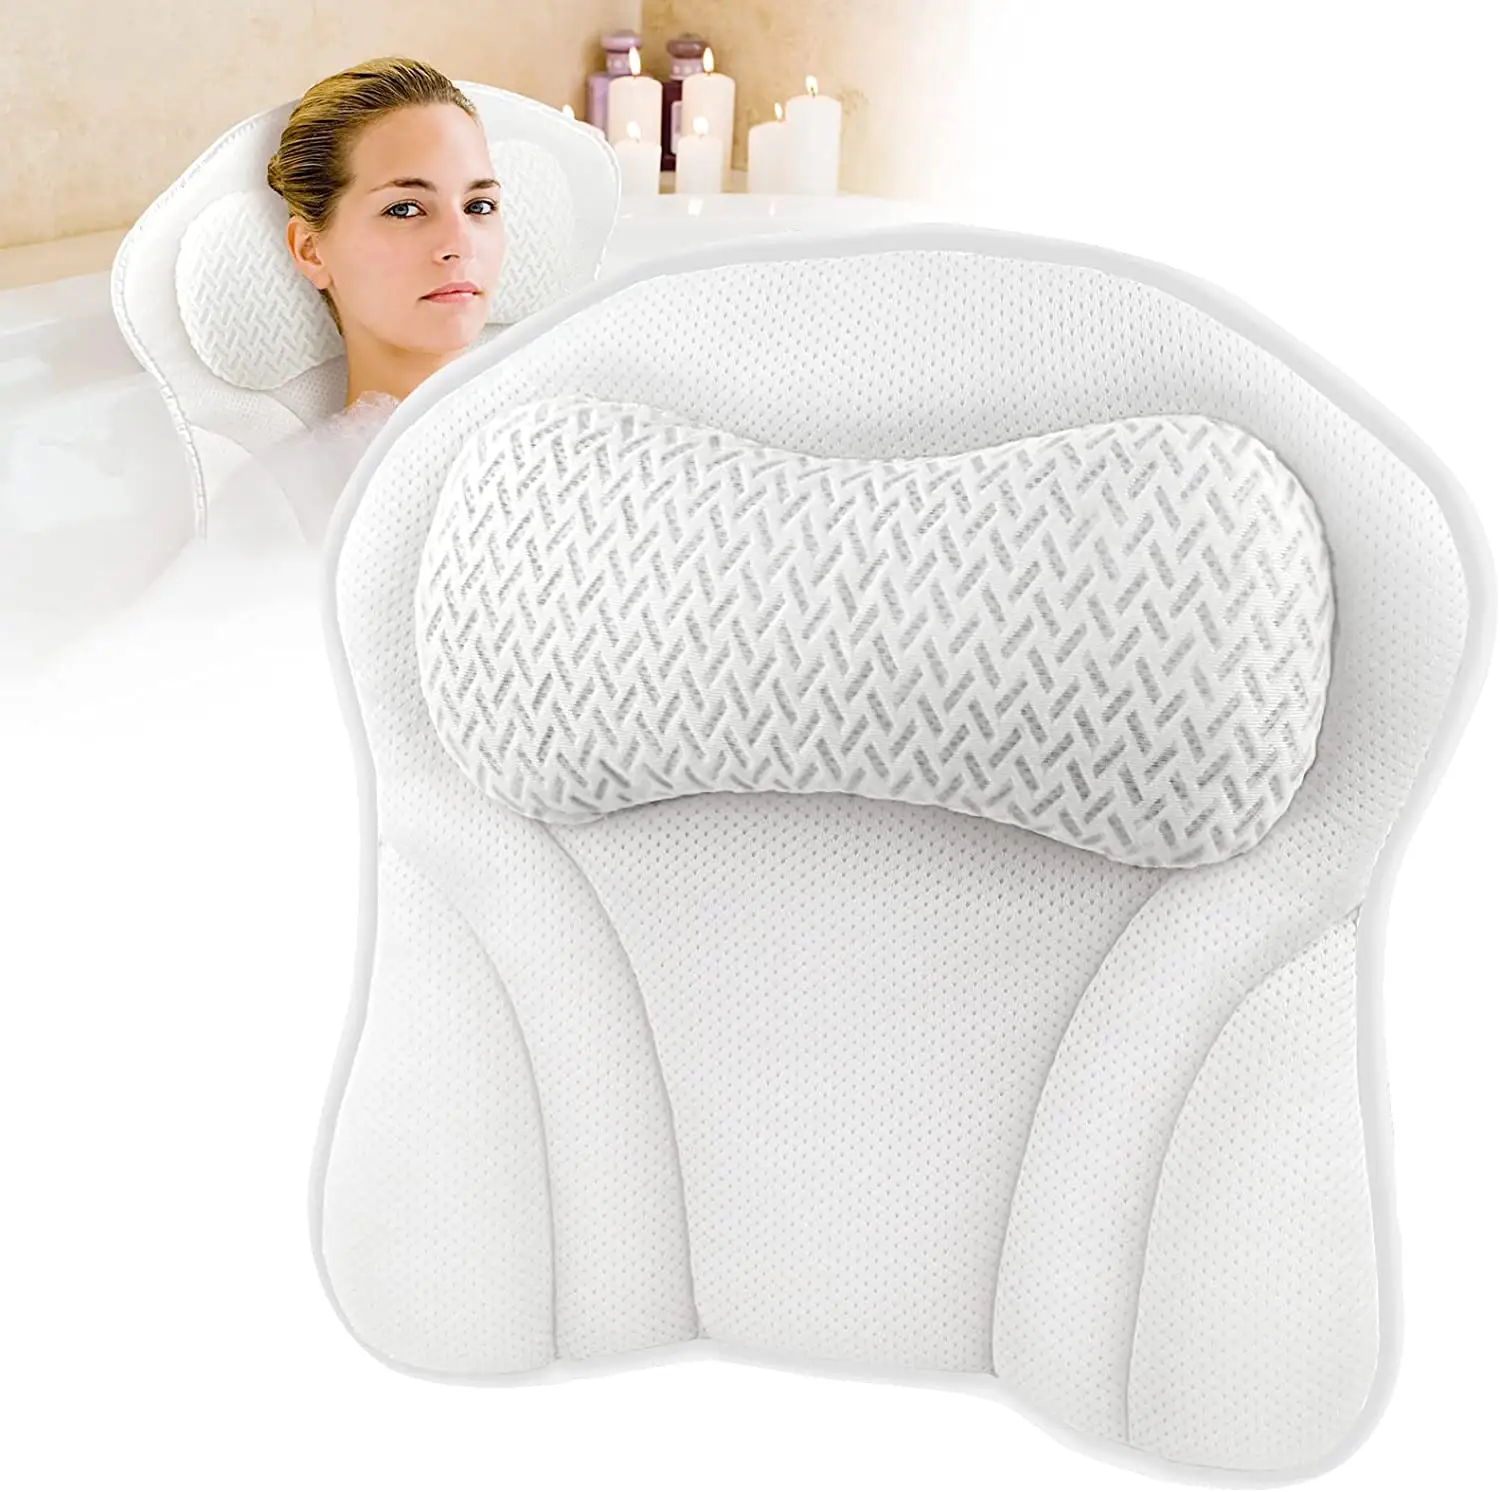 Kingworth Neck Back Support Tub Comfort Bathtub Pillow Bath Pillow With 6 Suction Cups